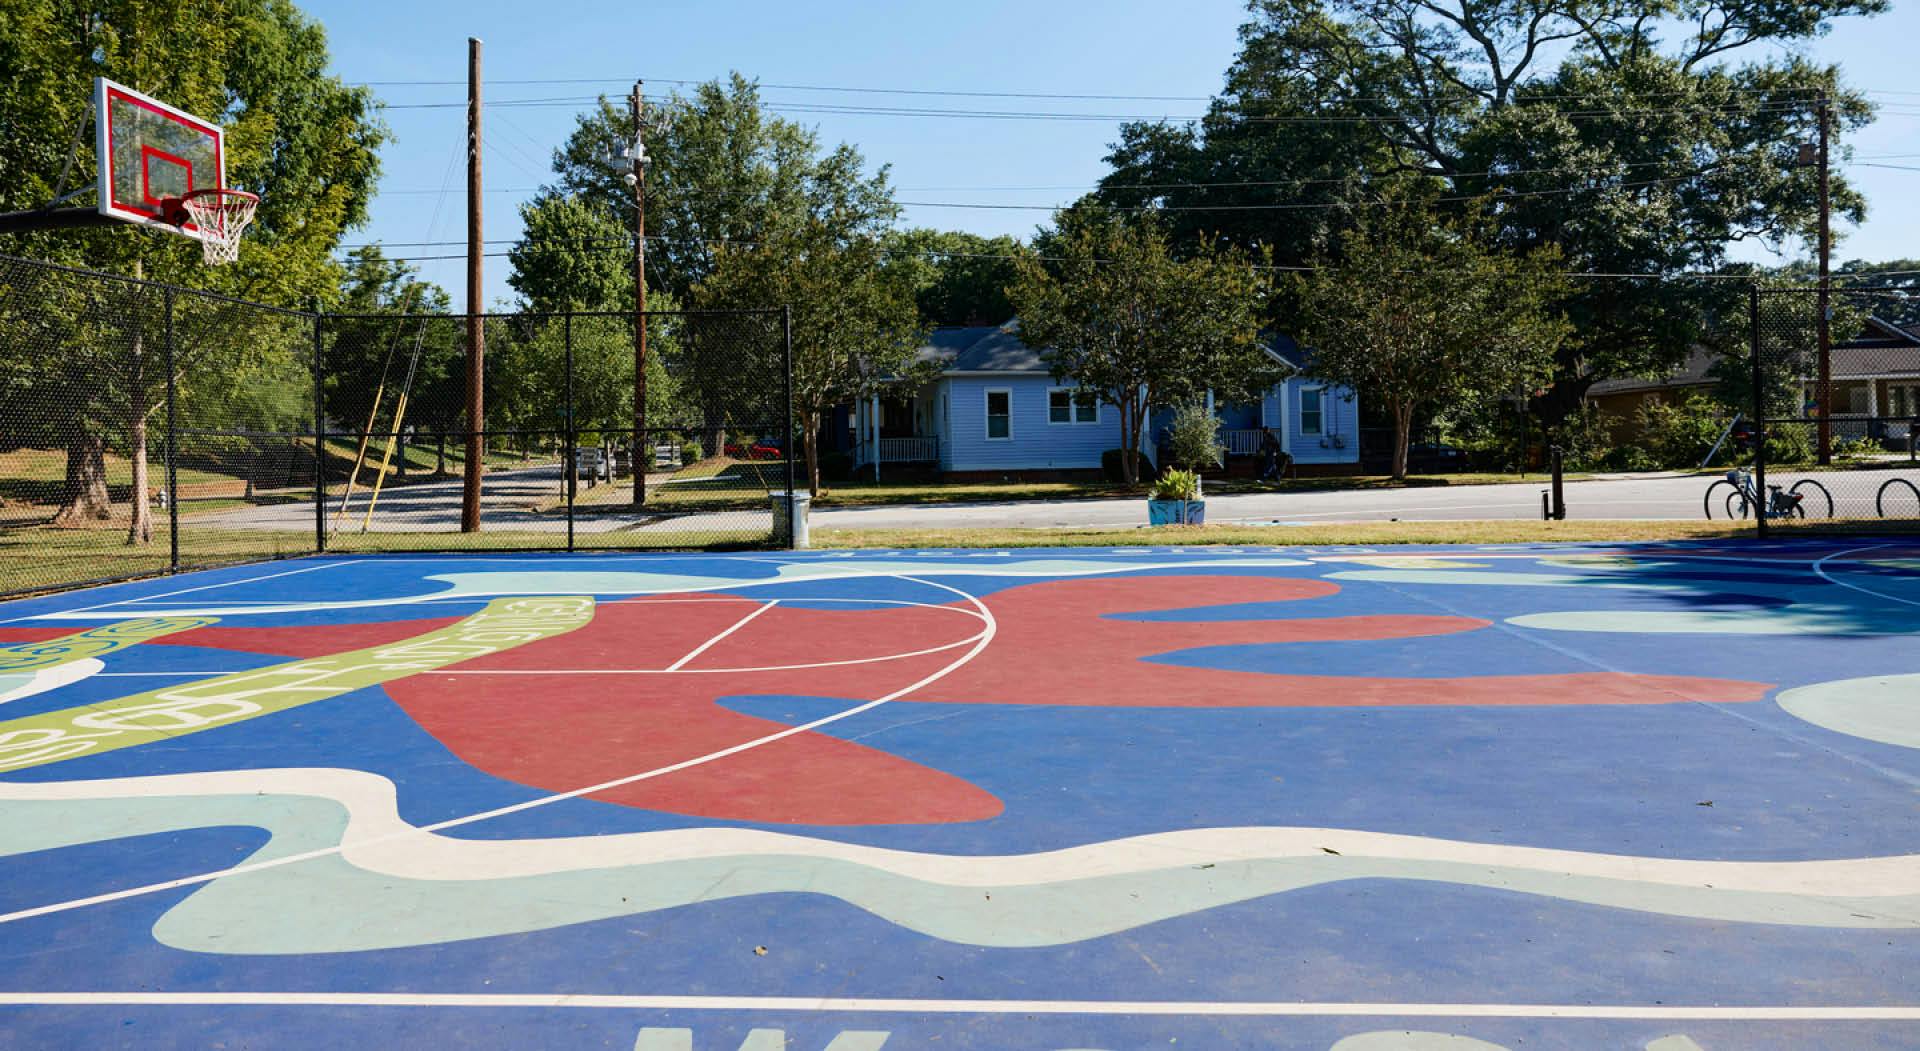 The basketball court is painted in a colorful blue, white, and red mural. (Photo Credit: Erin Sintos)